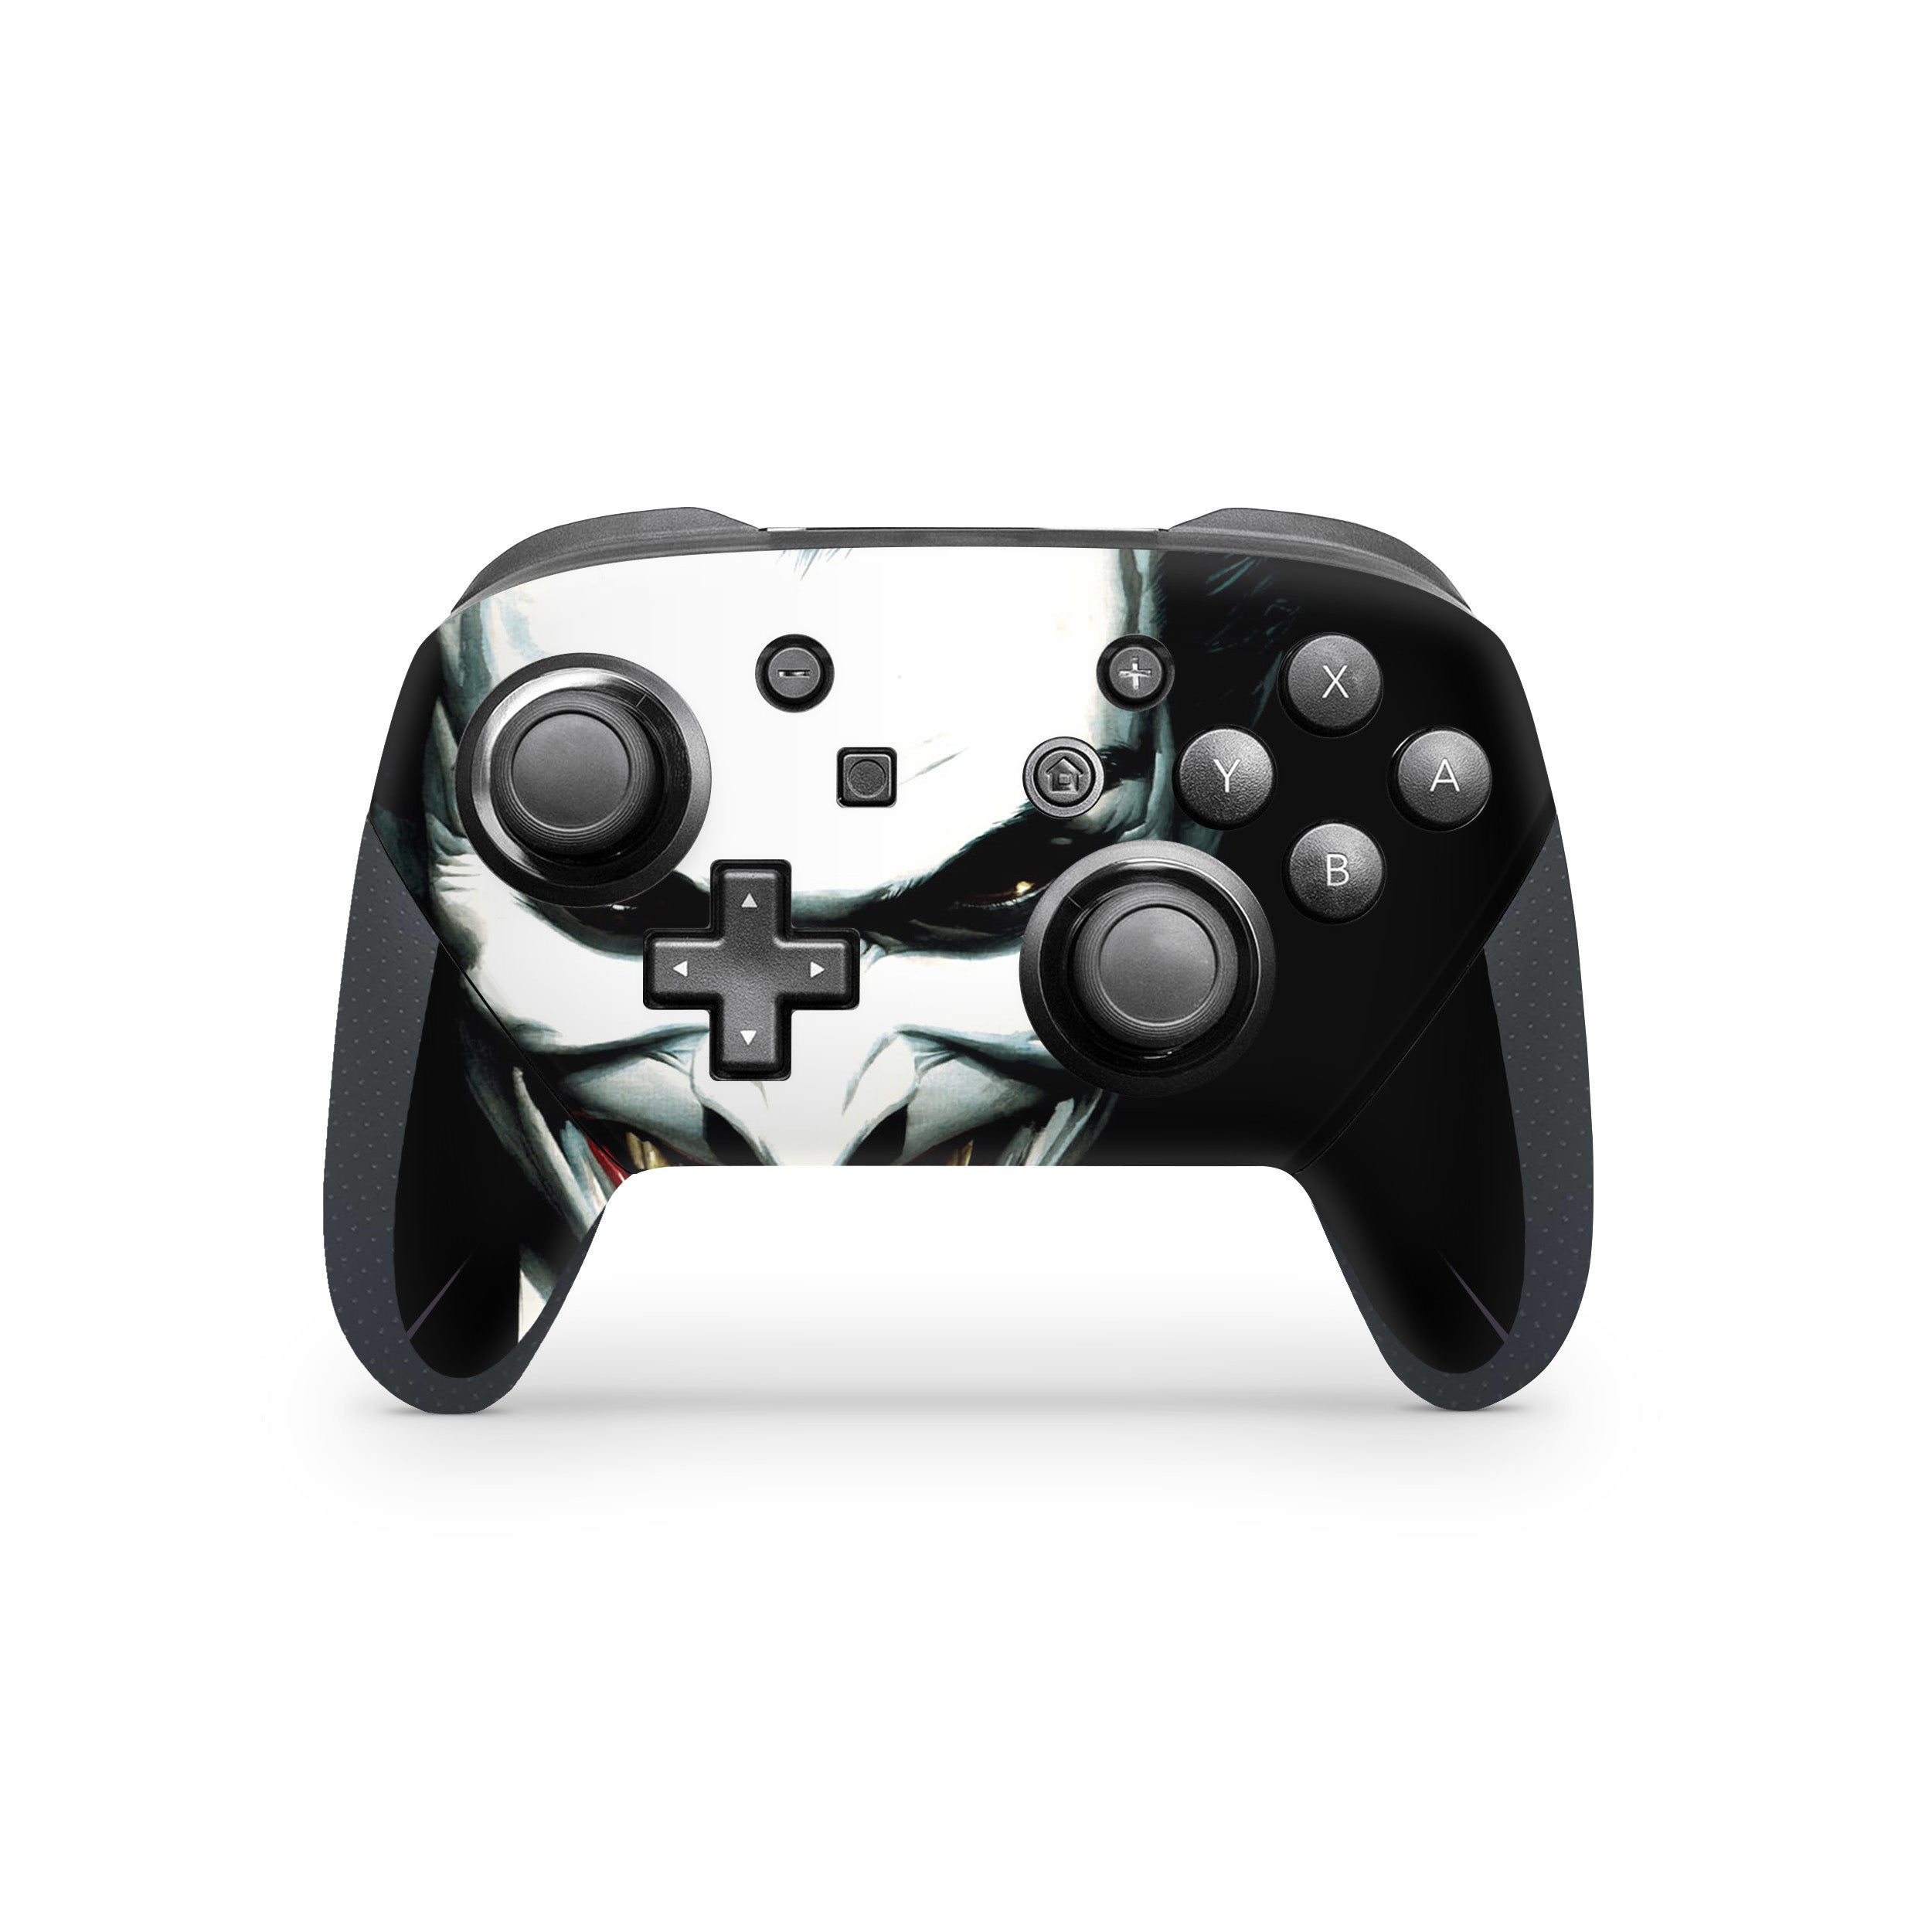 A video game skin featuring a DC Joker design for the Switch Pro Controller.